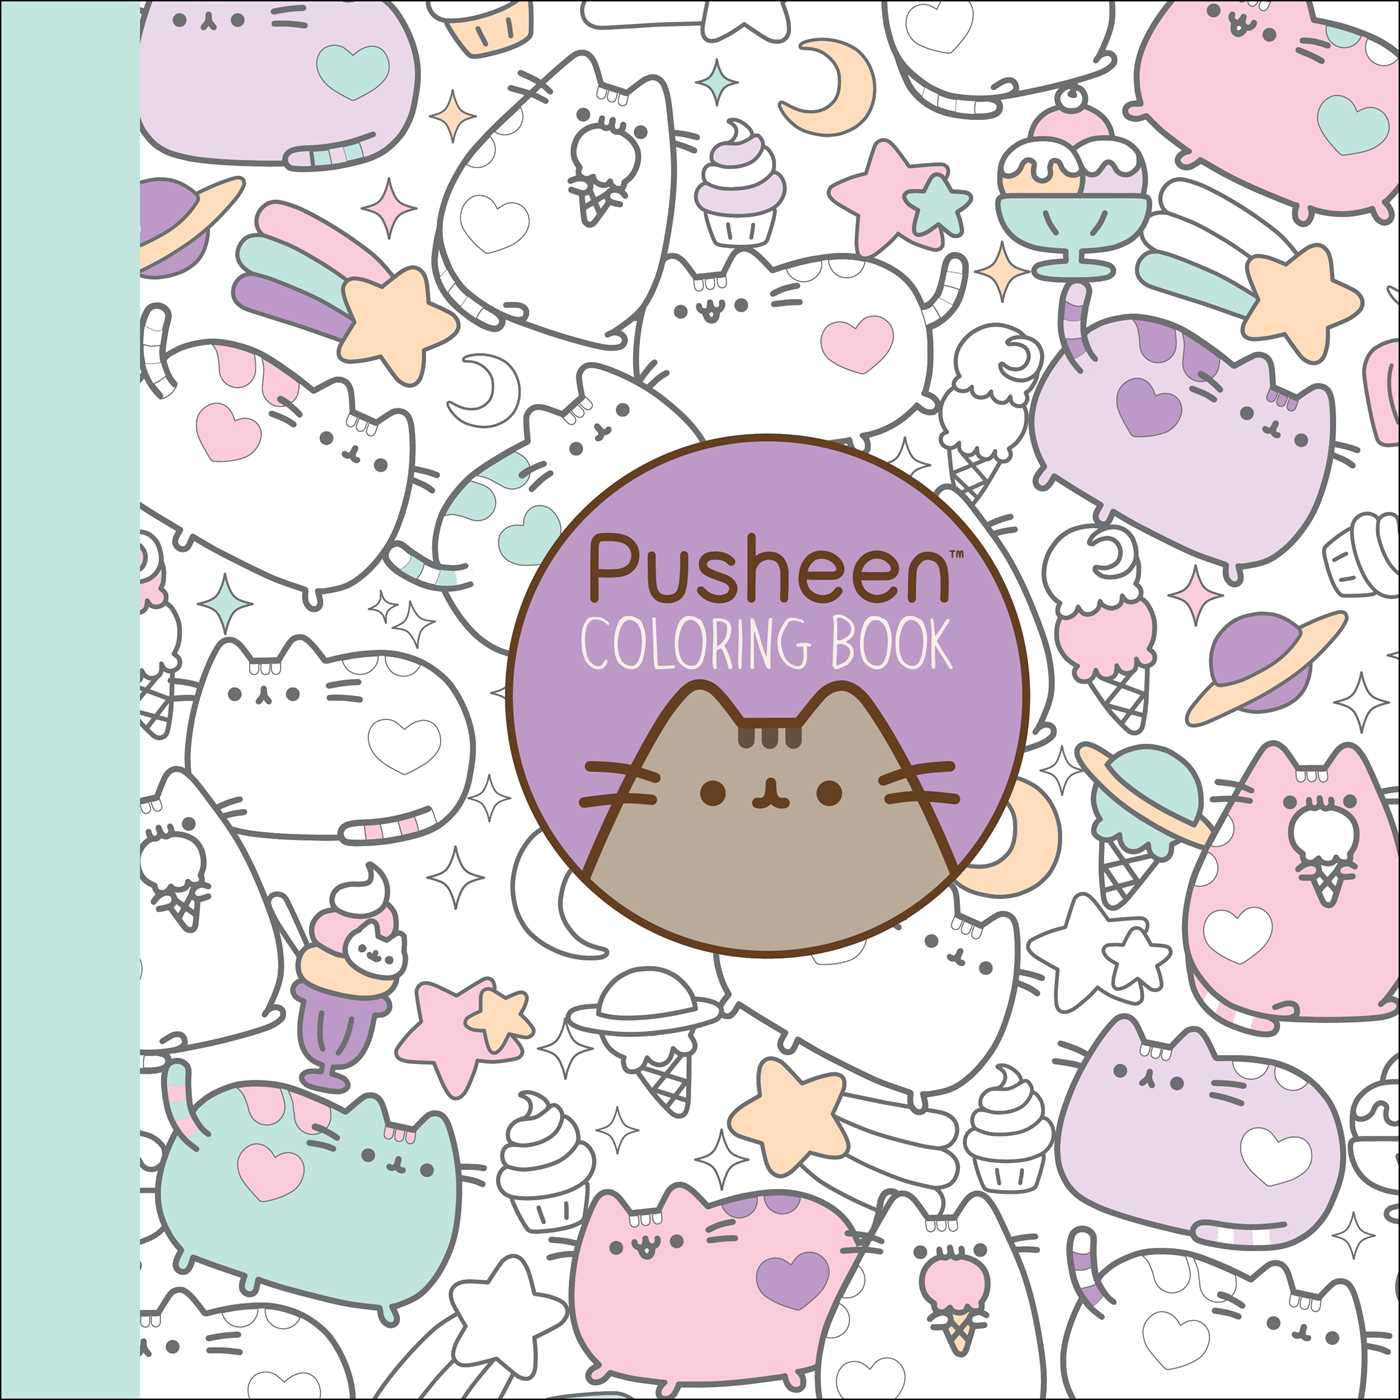 Pusheen Coloring Book
 Pusheen Coloring Book Book by Claire Belton